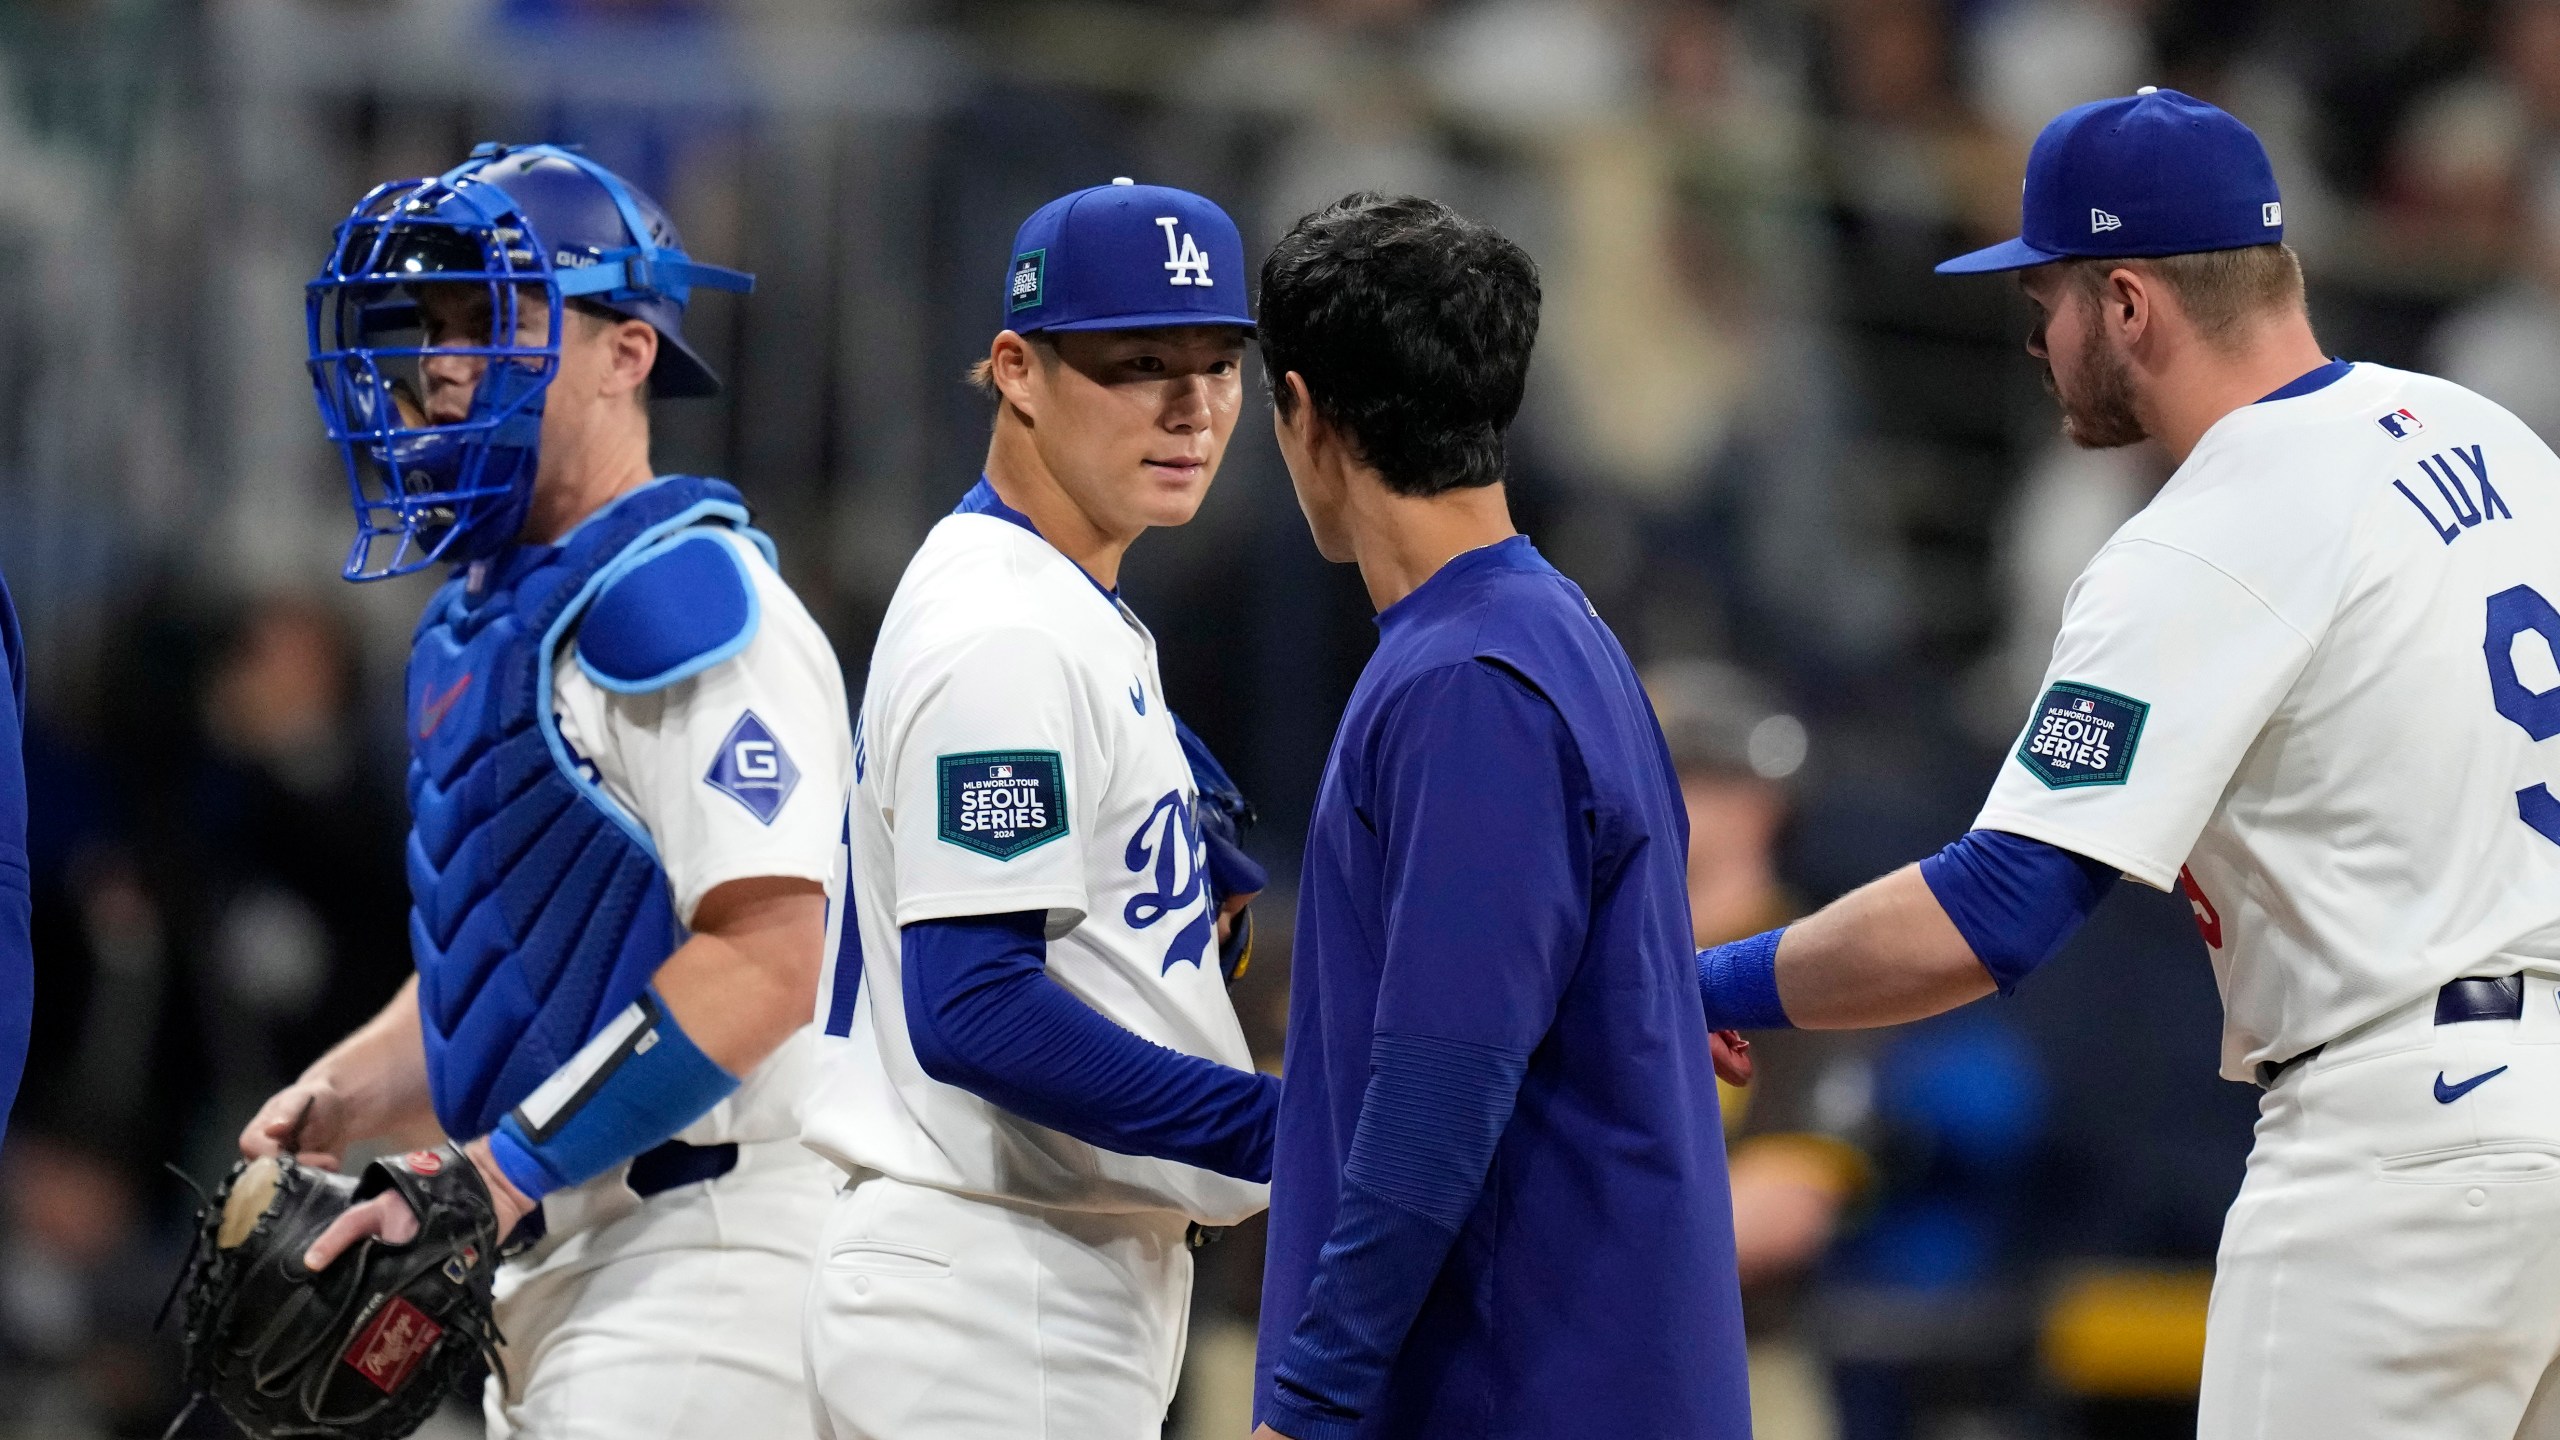 Los Angeles Dodgers starting pitcher Yoshinobu Yamamoto, second from left, speaks with interpreter Will Ireton, second from right, as catcher Will Smith, left, and second baseman Gavin Lux during the first inning of a baseball game at the Gocheok Sky Dome in Seoul, South Korea Thursday, March 21, 2024, in Seoul, South Korea. (AP Photo/Lee Jin-man)